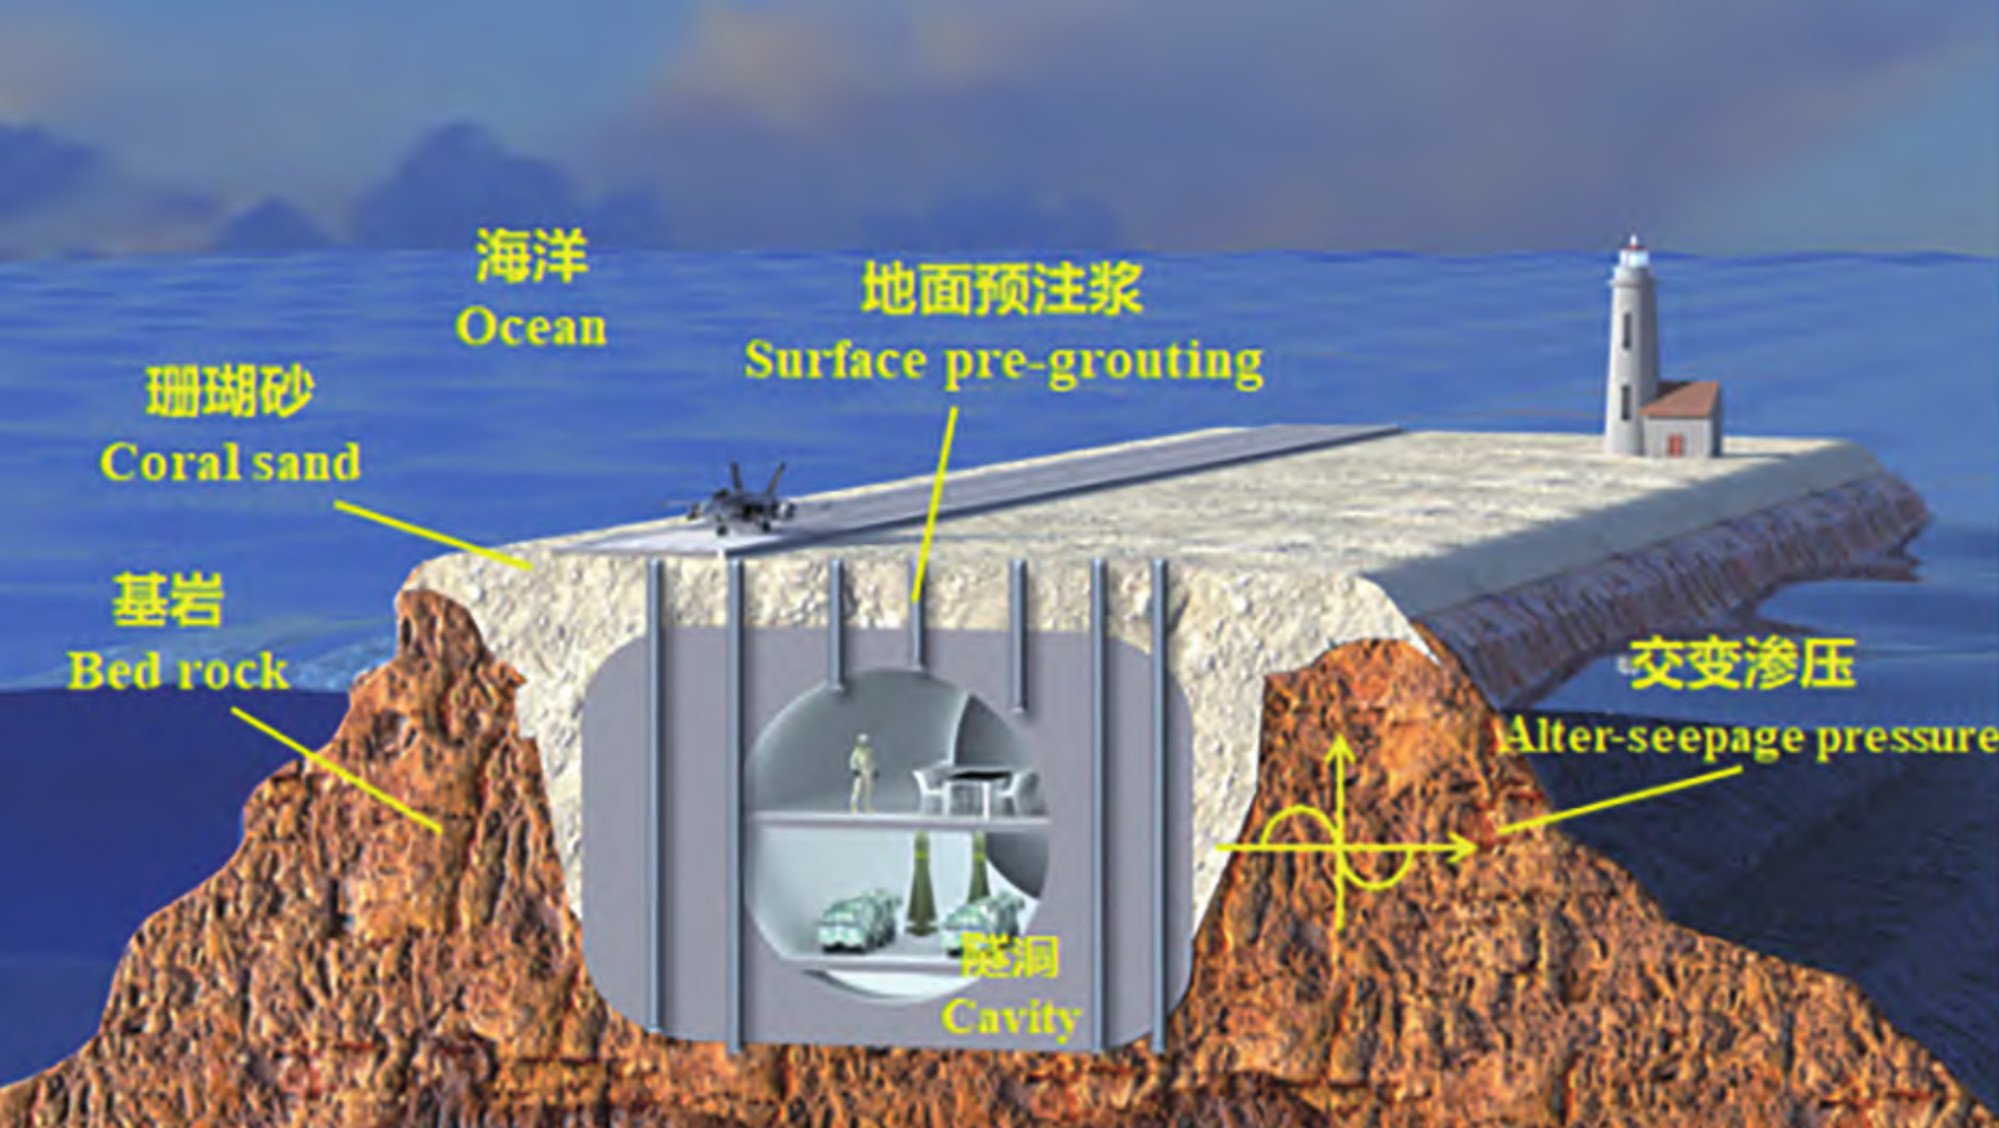 The Chinese researchers say laboratory tests have confirmed that tunnels could be excavated safely to create more space on artificial islands in the South China Sea. Illustration: Ocean University of China